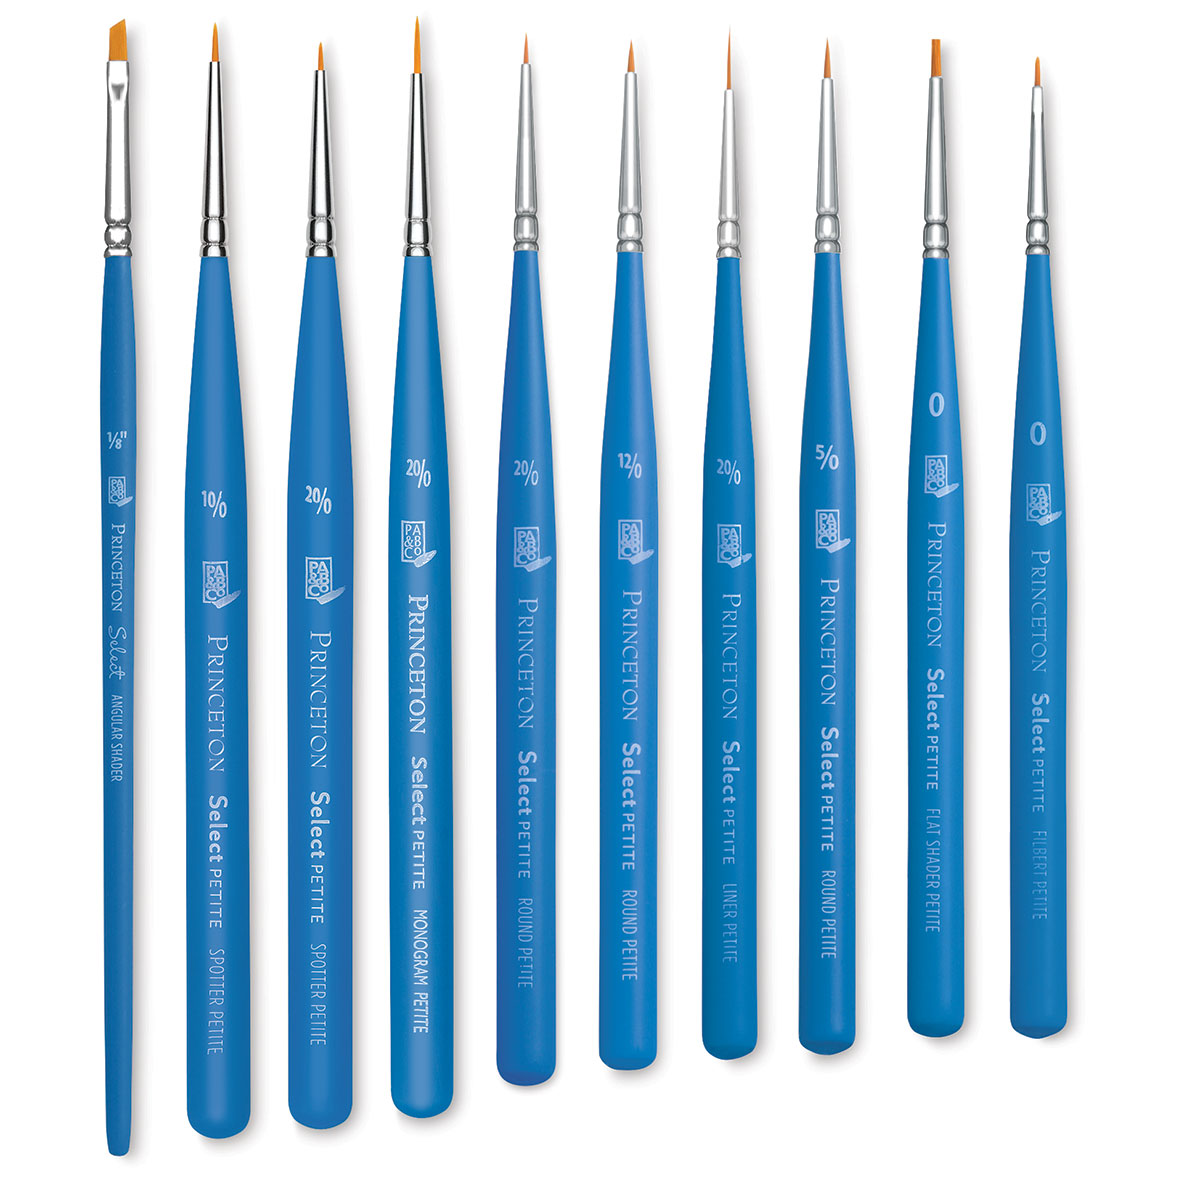 Select Filbert Series 3750 by Princeton Brush - Brushes and More